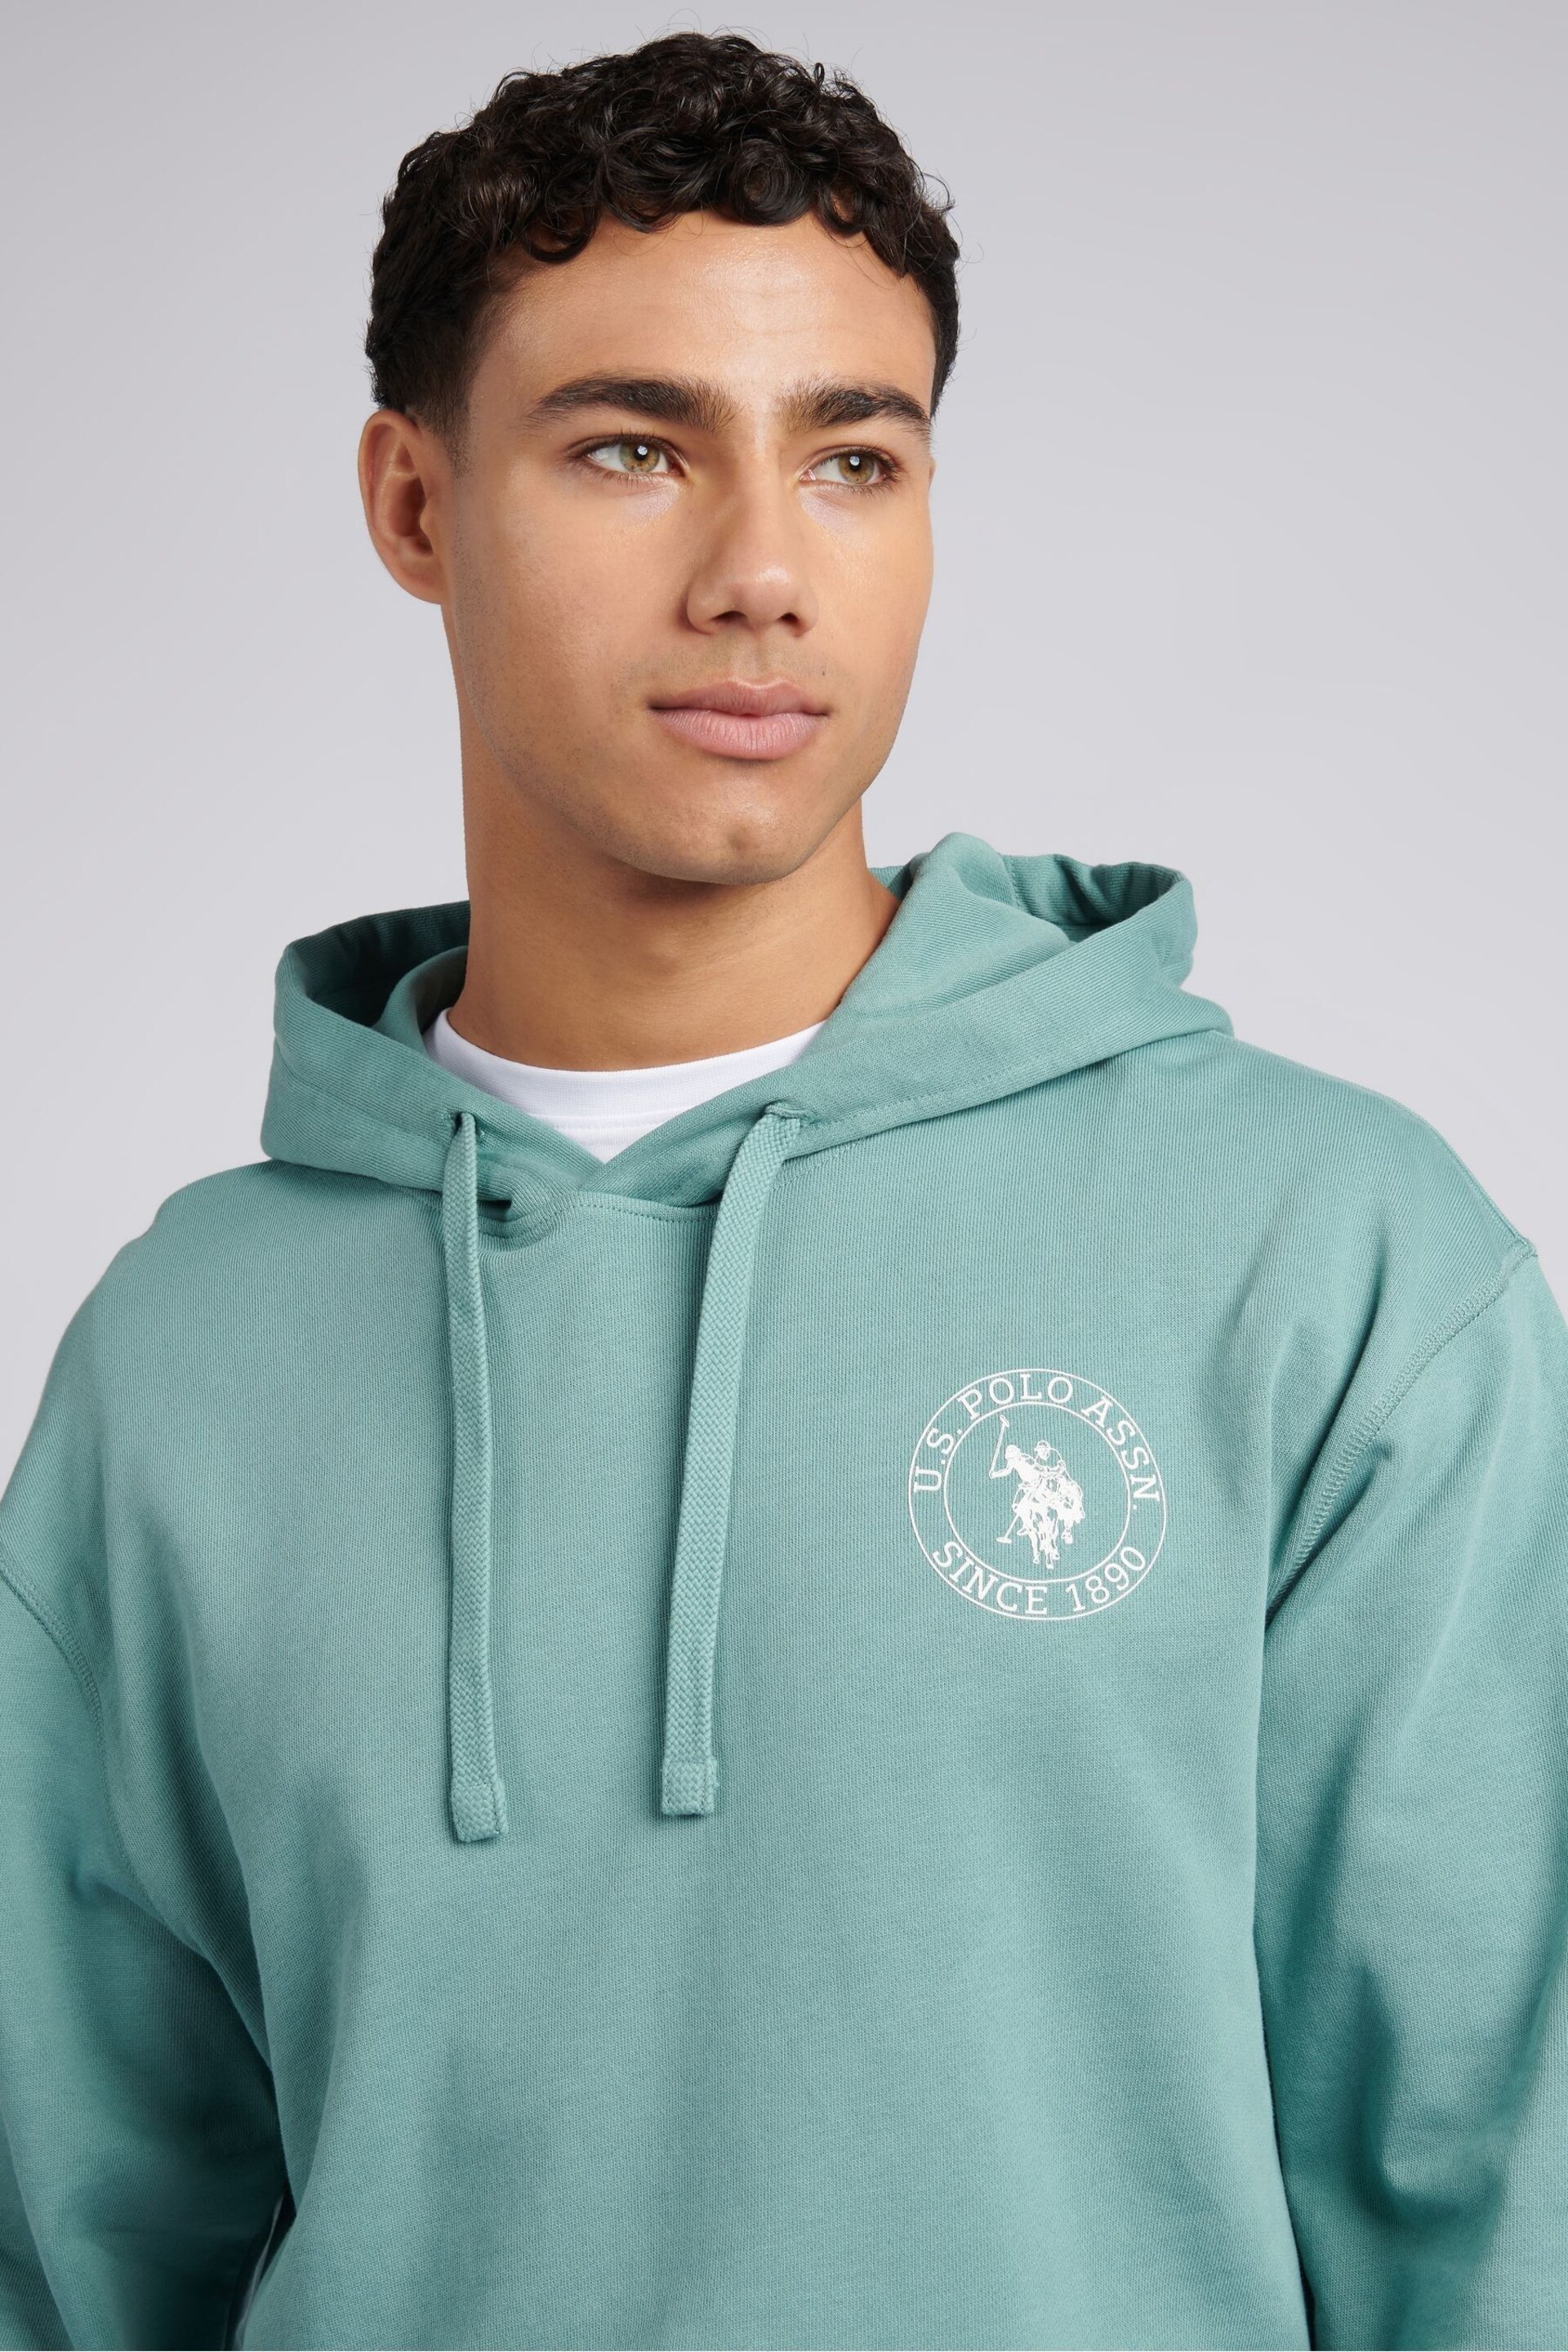 U.S. Polo Assn. Mens Blue Classic Fit Circle Print Hoodie - Image 2 of 10